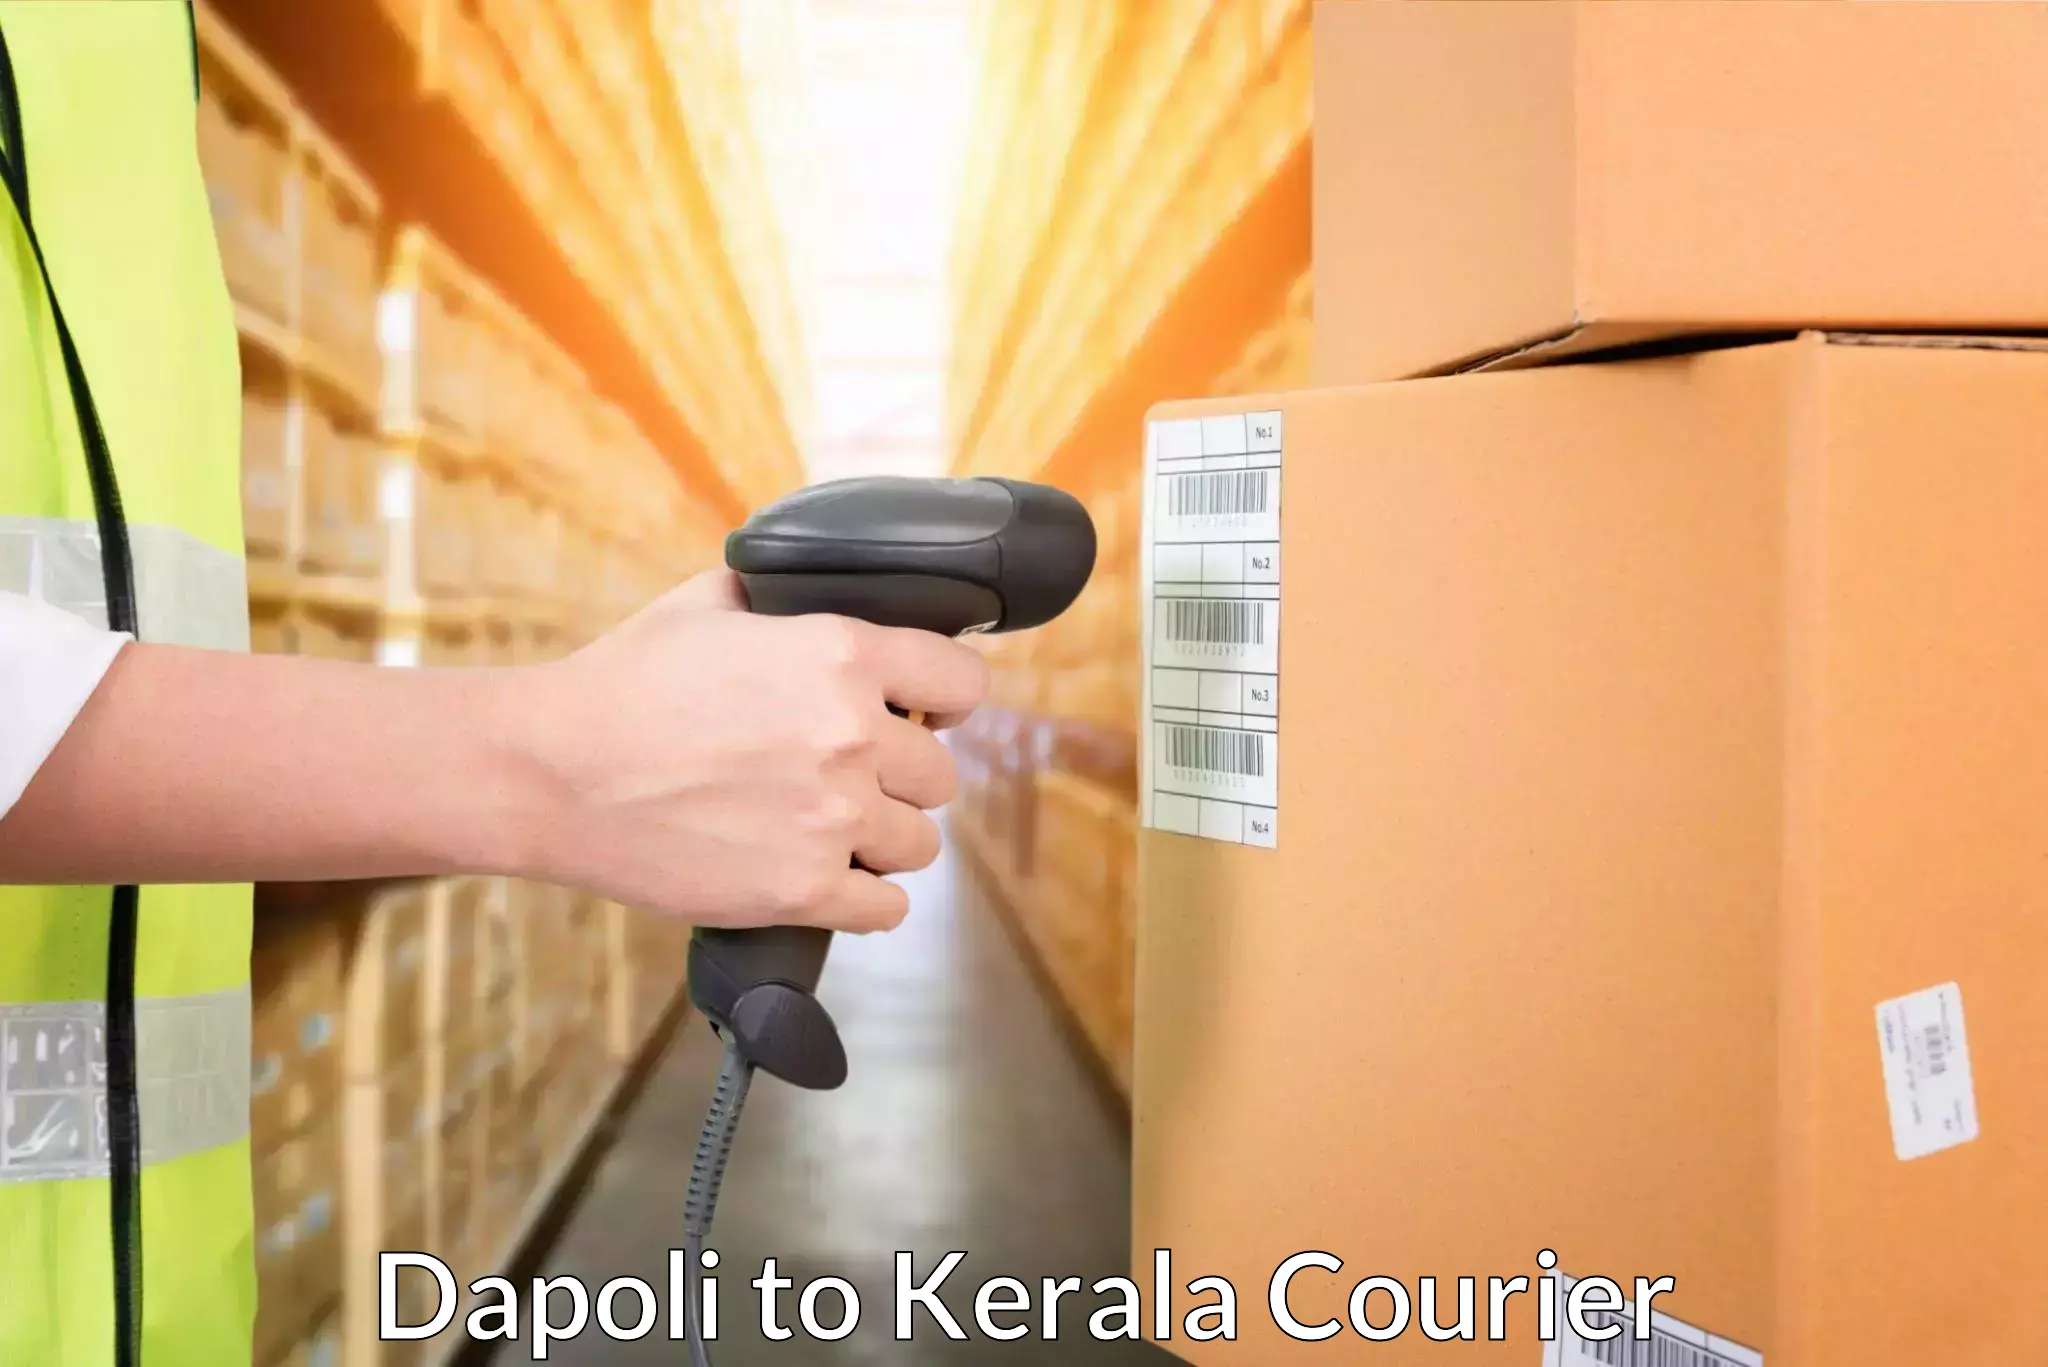 Nationwide parcel services Dapoli to Kerala